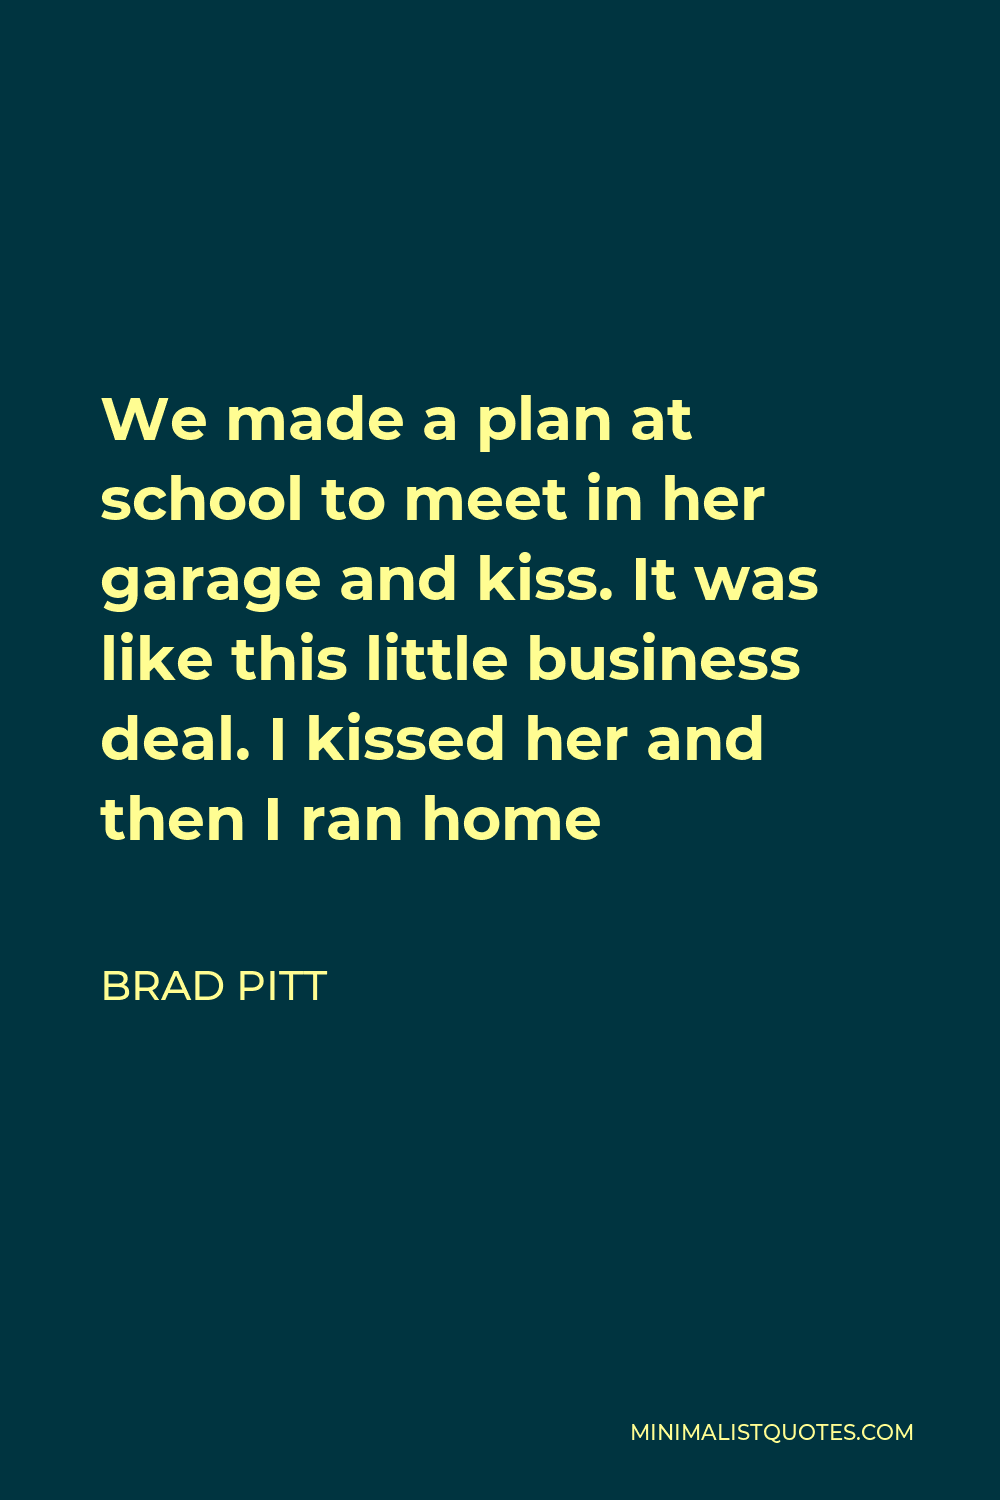 Brad Pitt Quote - We made a plan at school to meet in her garage and kiss. It was like this little business deal. I kissed her and then I ran home